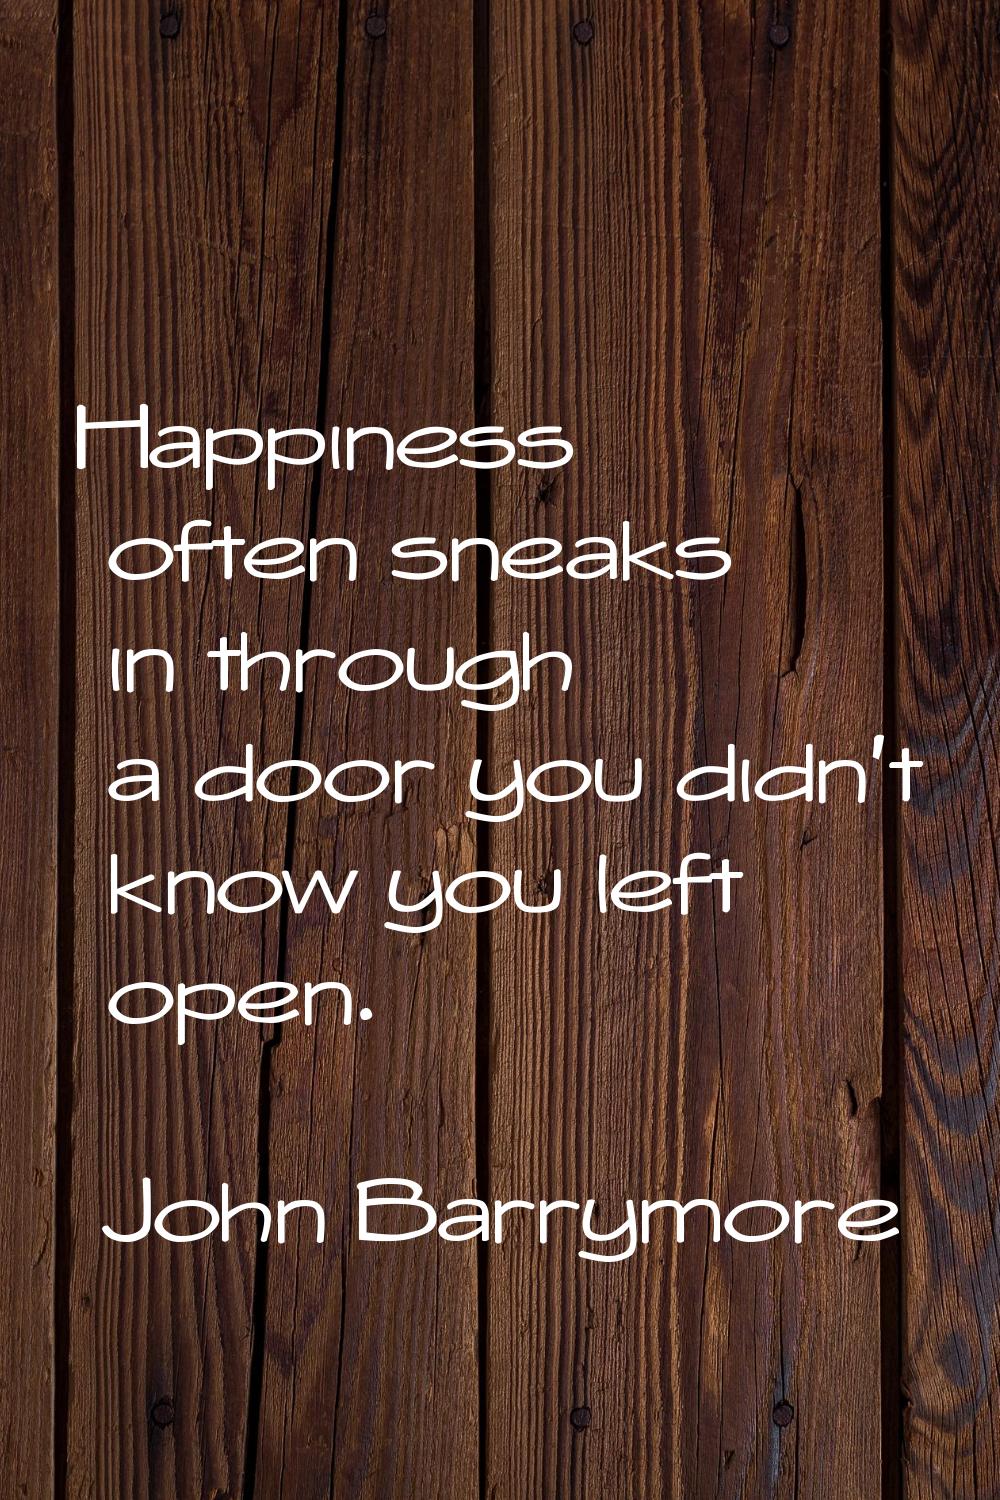 Happiness often sneaks in through a door you didn't know you left open.